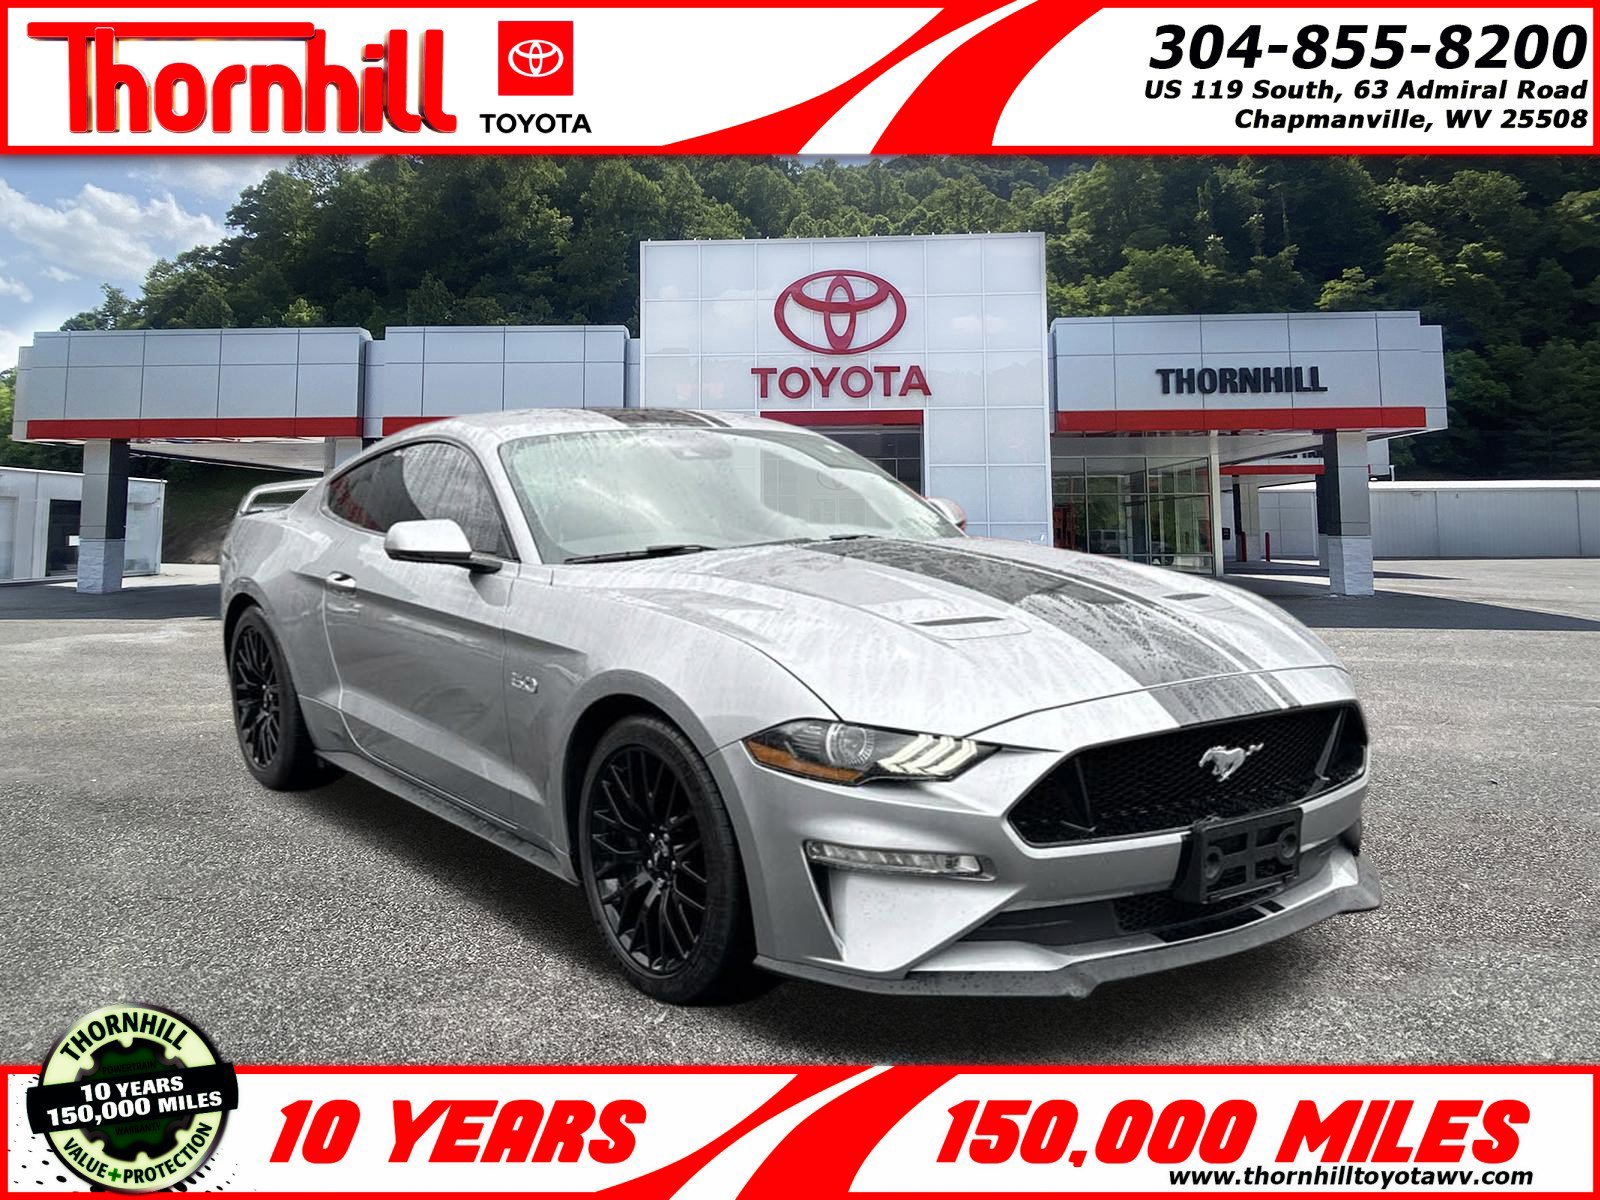 2020 Ford Mustang Chapmanville WV